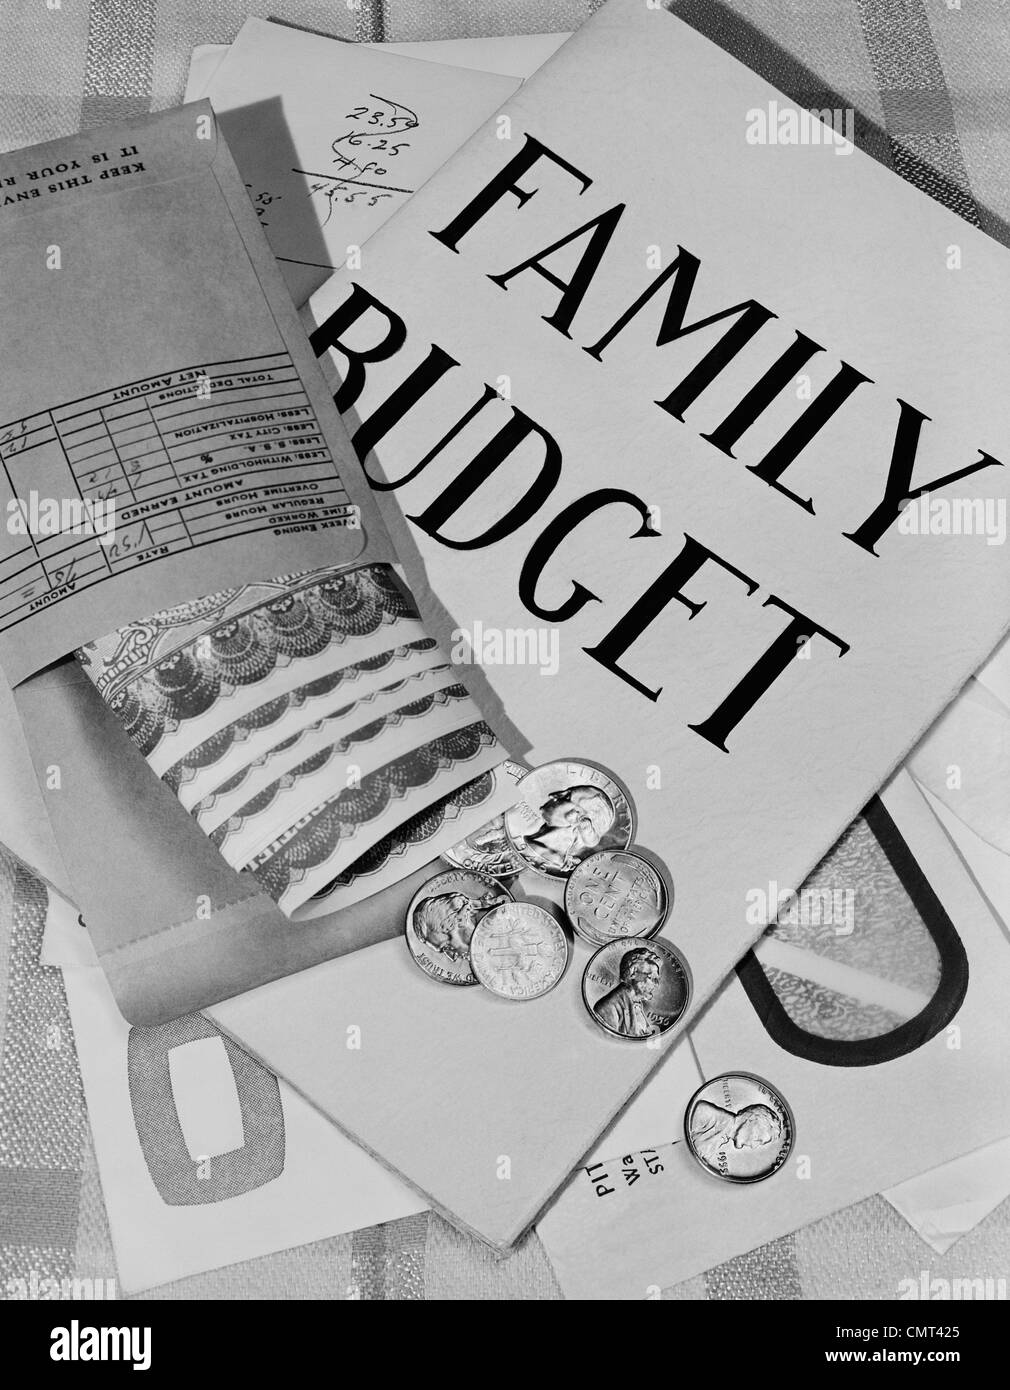 1950s STILL LIFE FAMILY BUDGET MONEY CURRENCY CASH COINS BILLS PAYROLL ENVELOPE Stock Photo